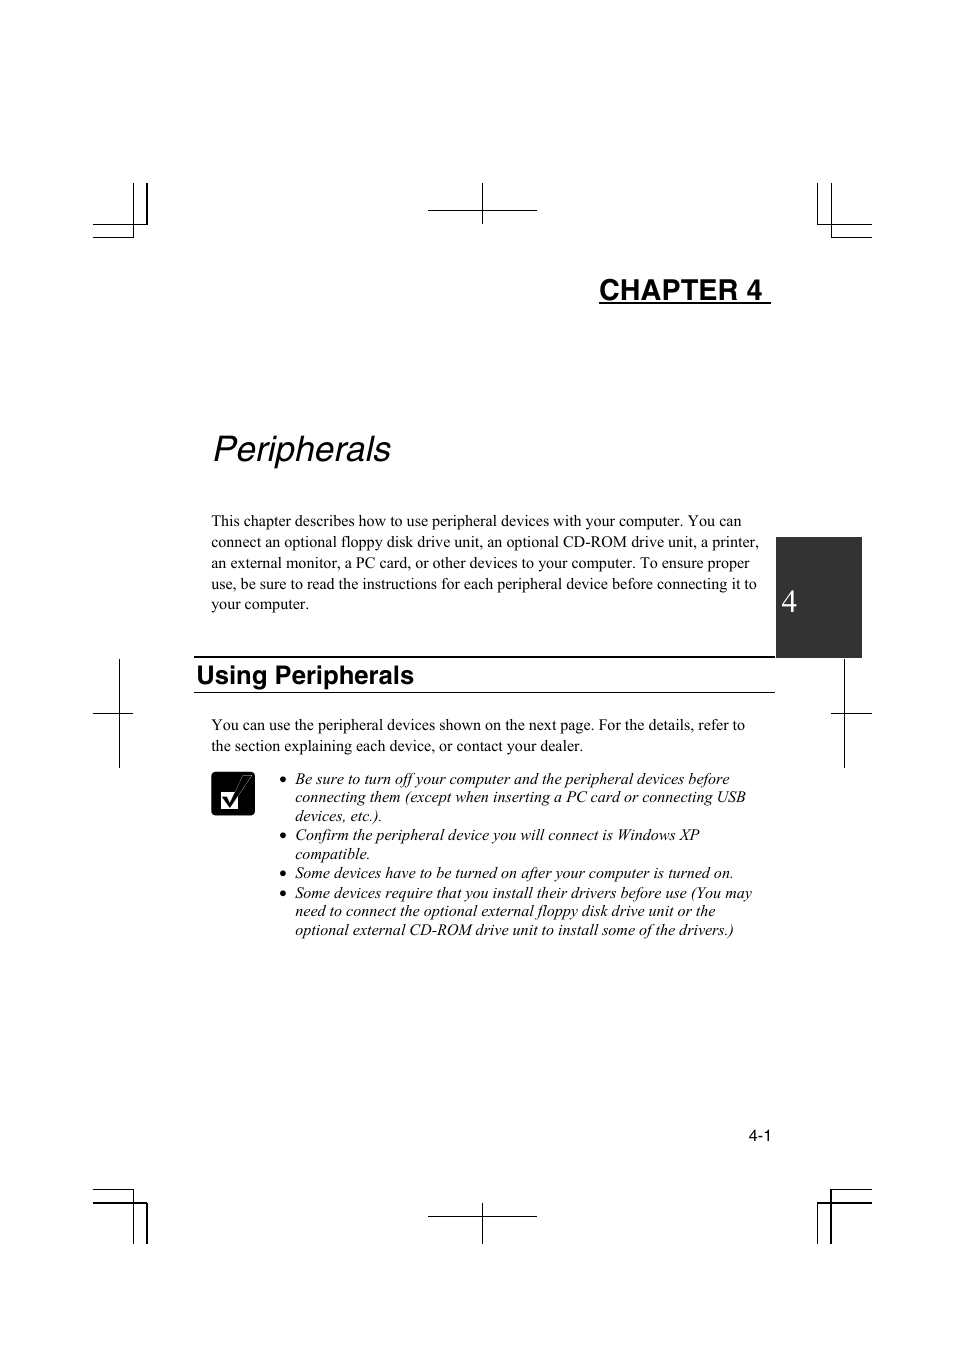 Peripherals, Using peripherals, Chapter 4 | Sharp PC-MM1 User Manual | Page 51 / 123